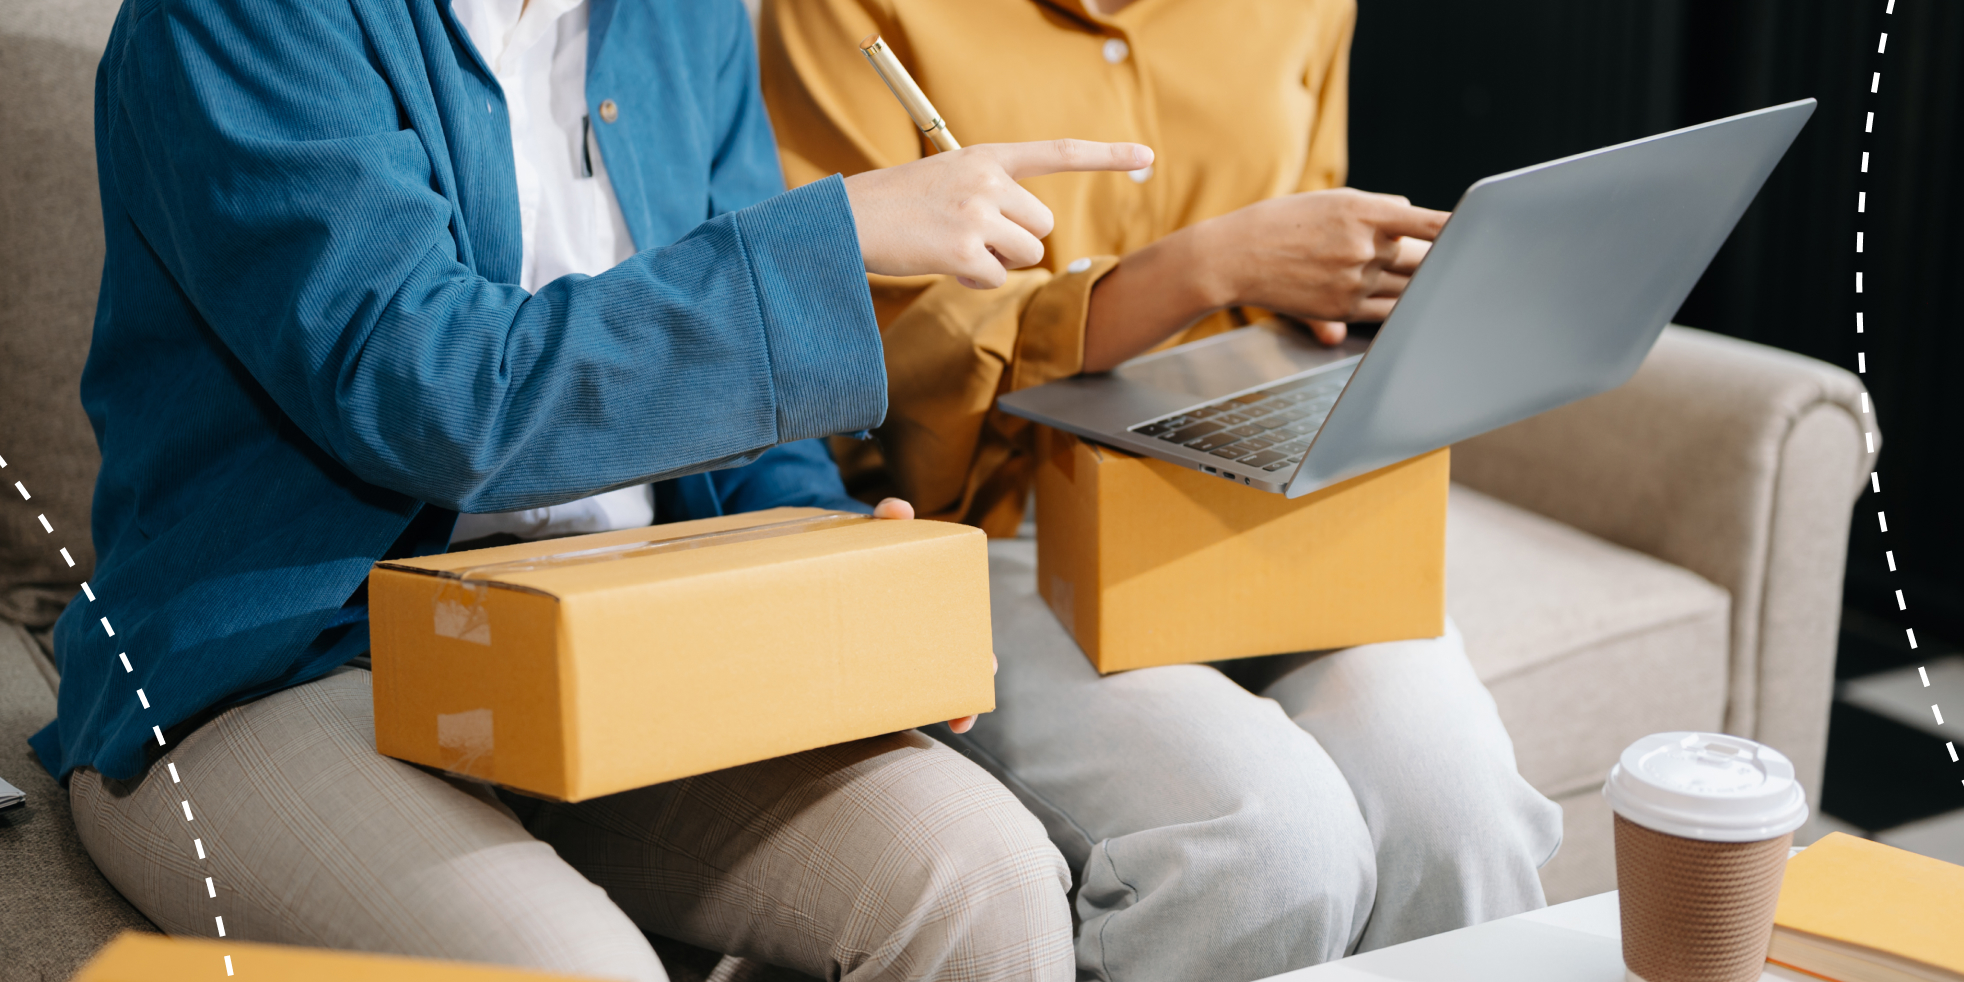 Can E-Commerce Supply Chains Benefit From Automating Customer Returns?